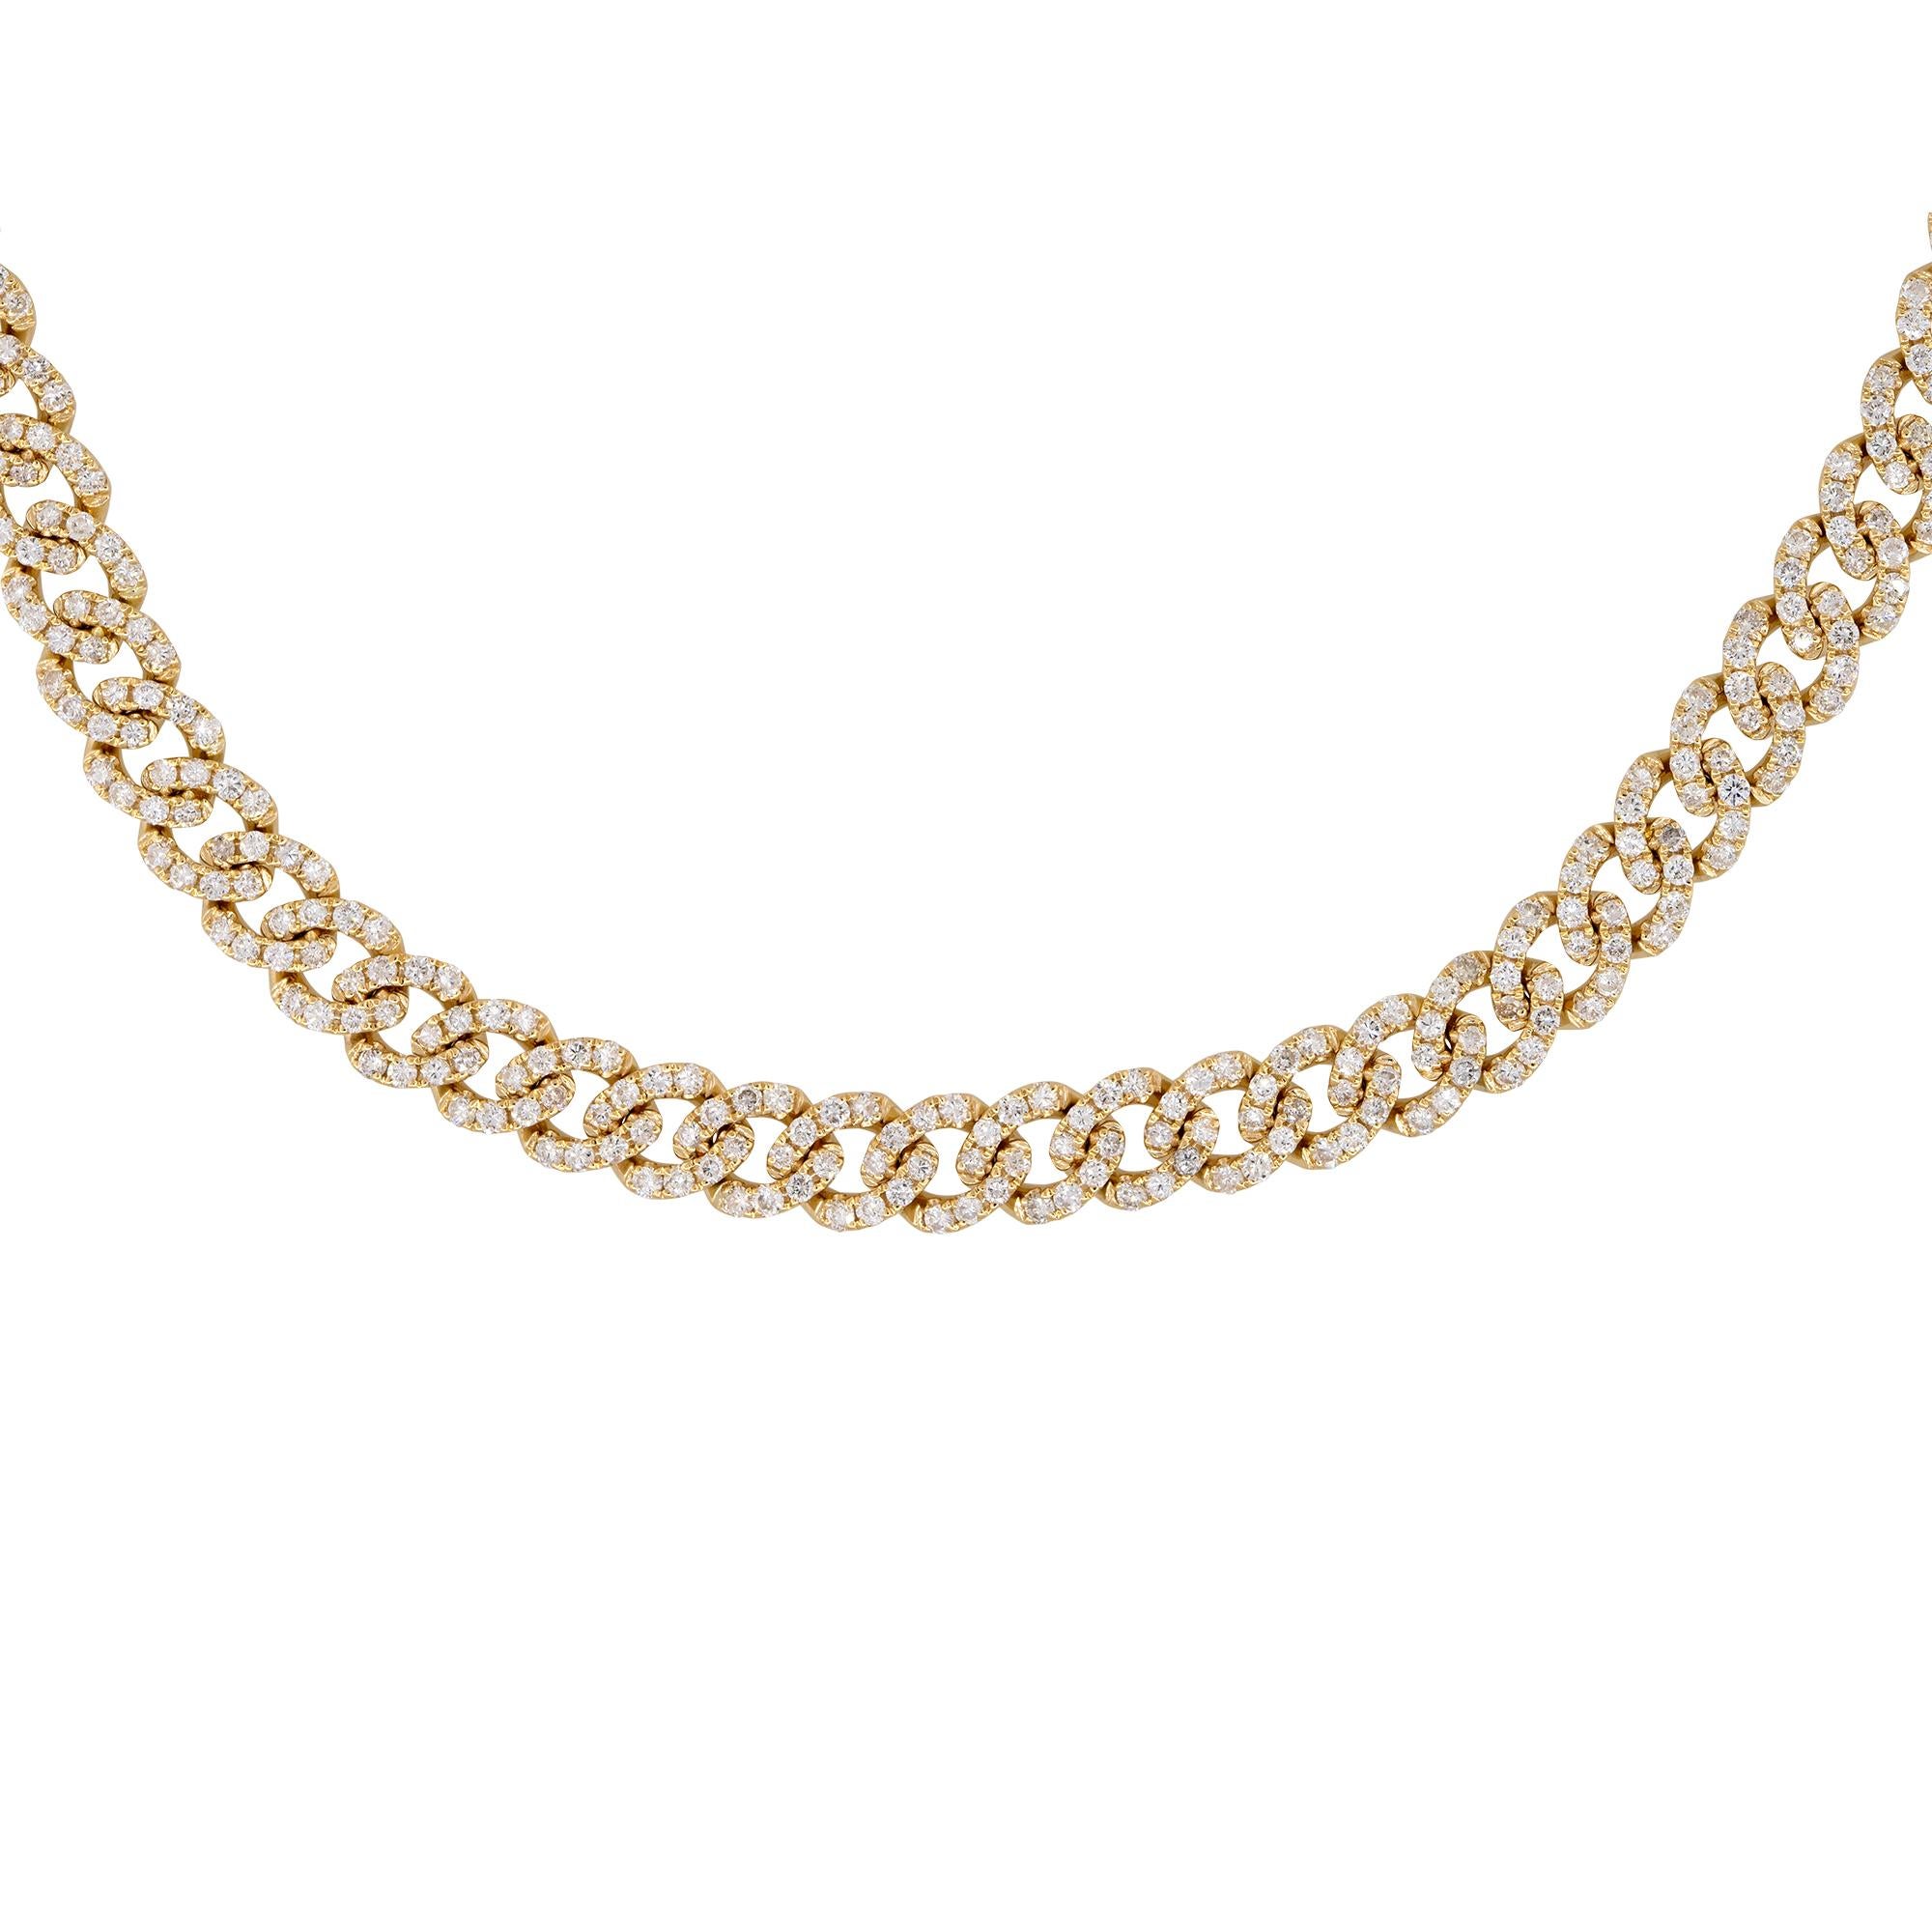 18k Yellow Gold 8.25ctw Pave Diamond Cuban Link Necklace

Material: 18k yellow gold
Diamond Details: There are approximately 8.25 carats of round brilliant cut diamonds
Diamond Clarity: All diamonds are approximately SI (Slightly Included) in